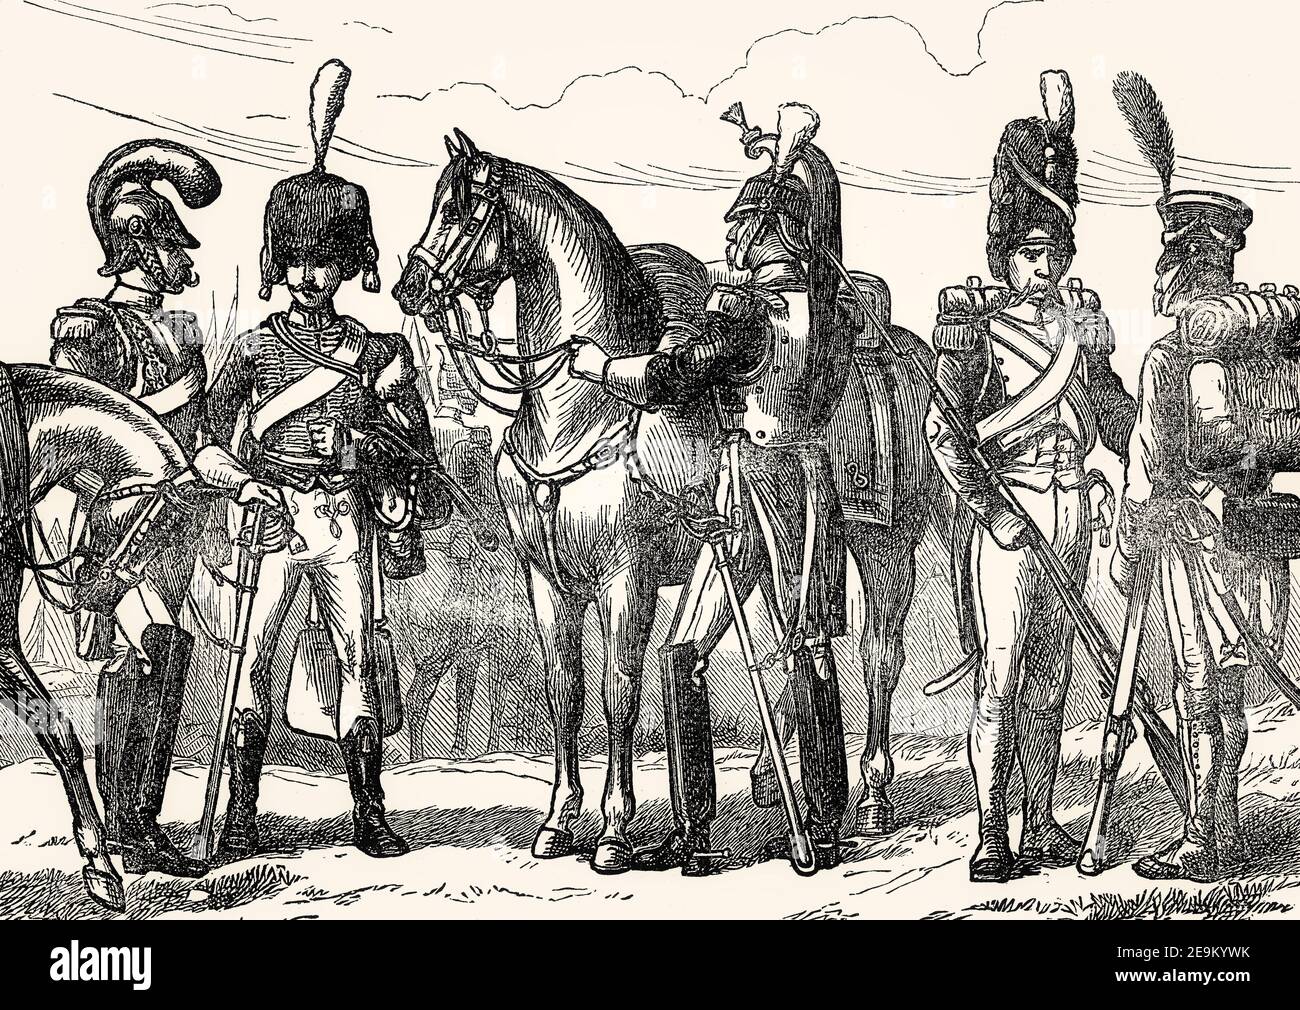 French military uniforms, 1811; From British Battles on Land and Sea, by James Grant Stock Photo